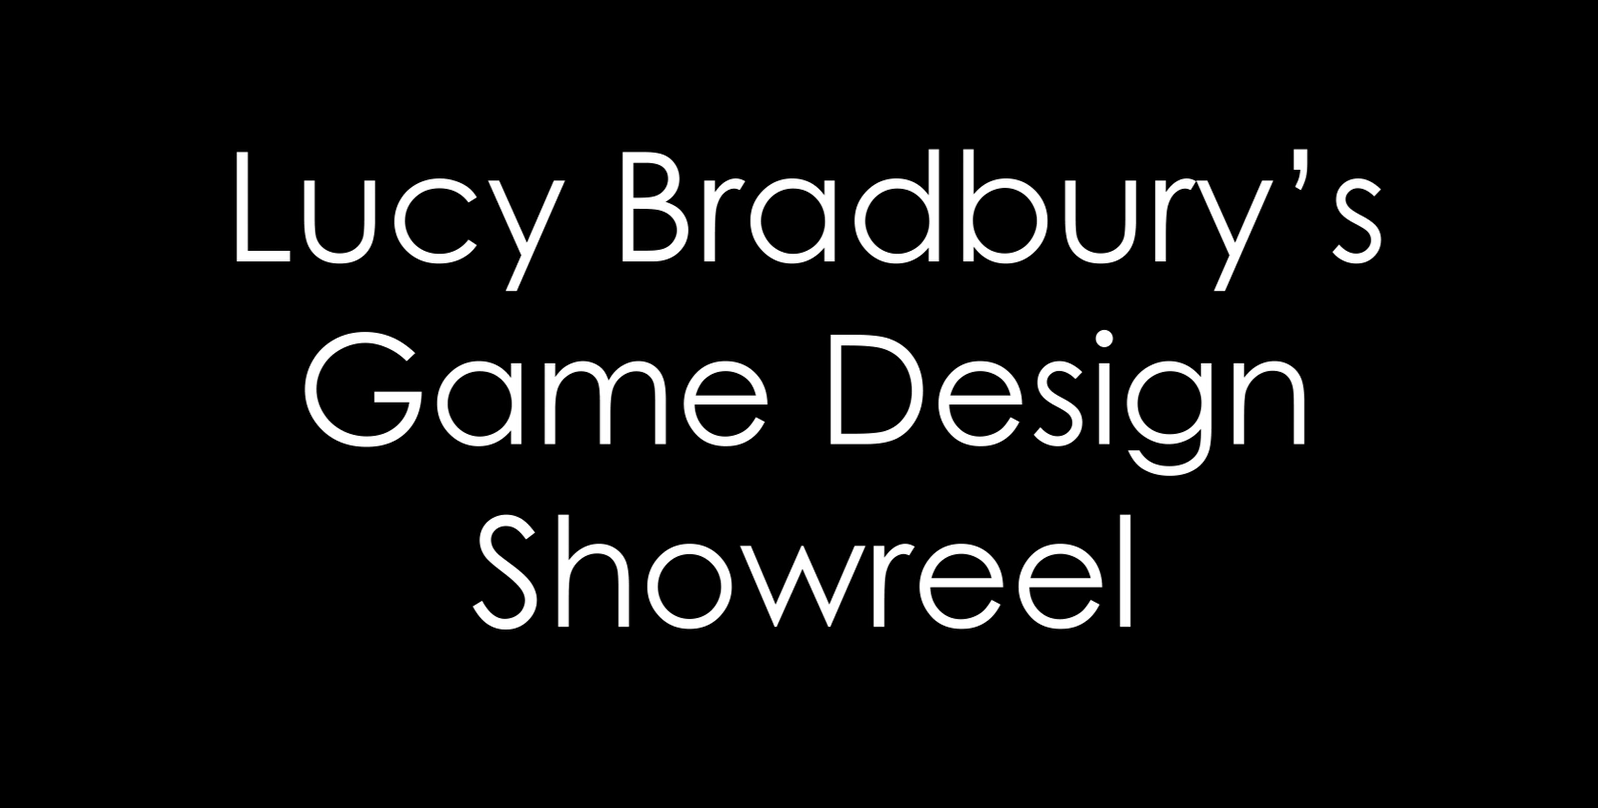 BA Games Art and Design work by Lucy Bradbury showing a showreel of work complied from the games they created.